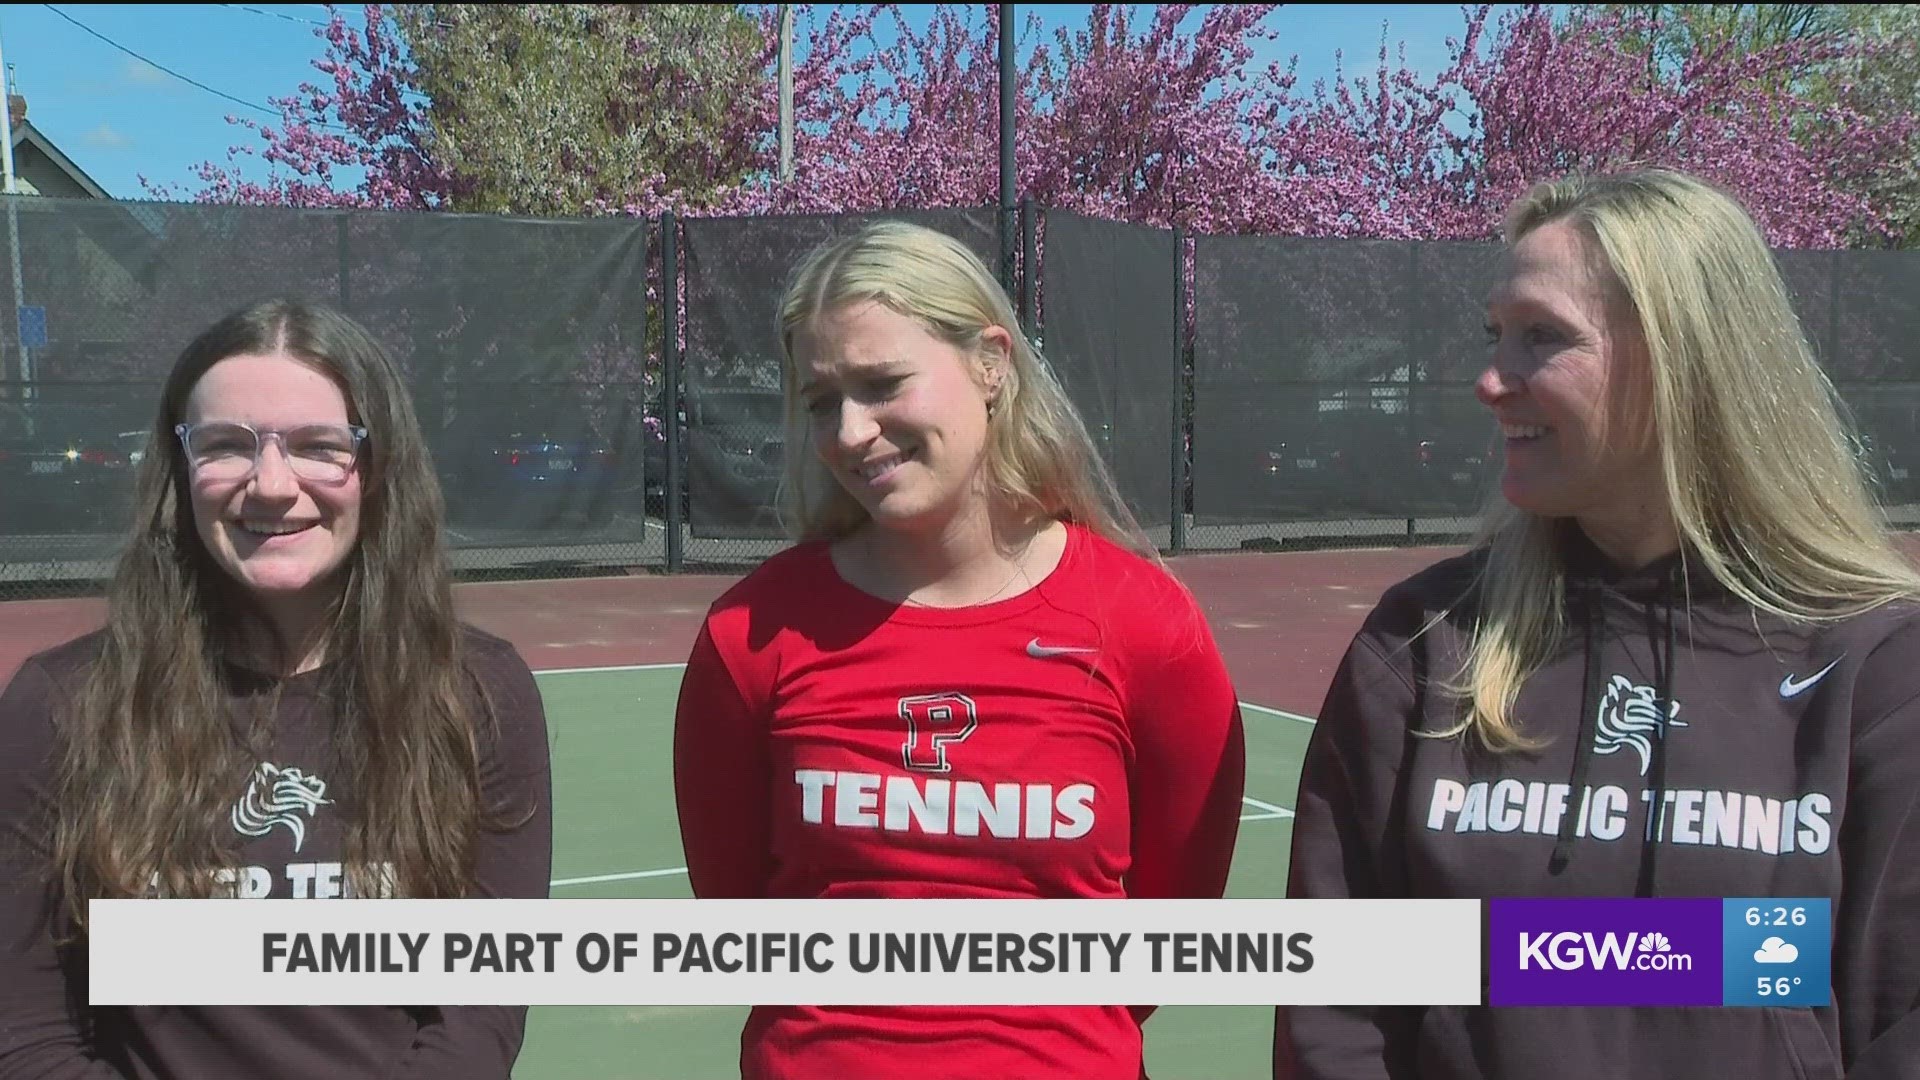 Head coach Traci Binder has two of her daughters playing for the women’s tennis team at Pacific University, both were state champions in high school.